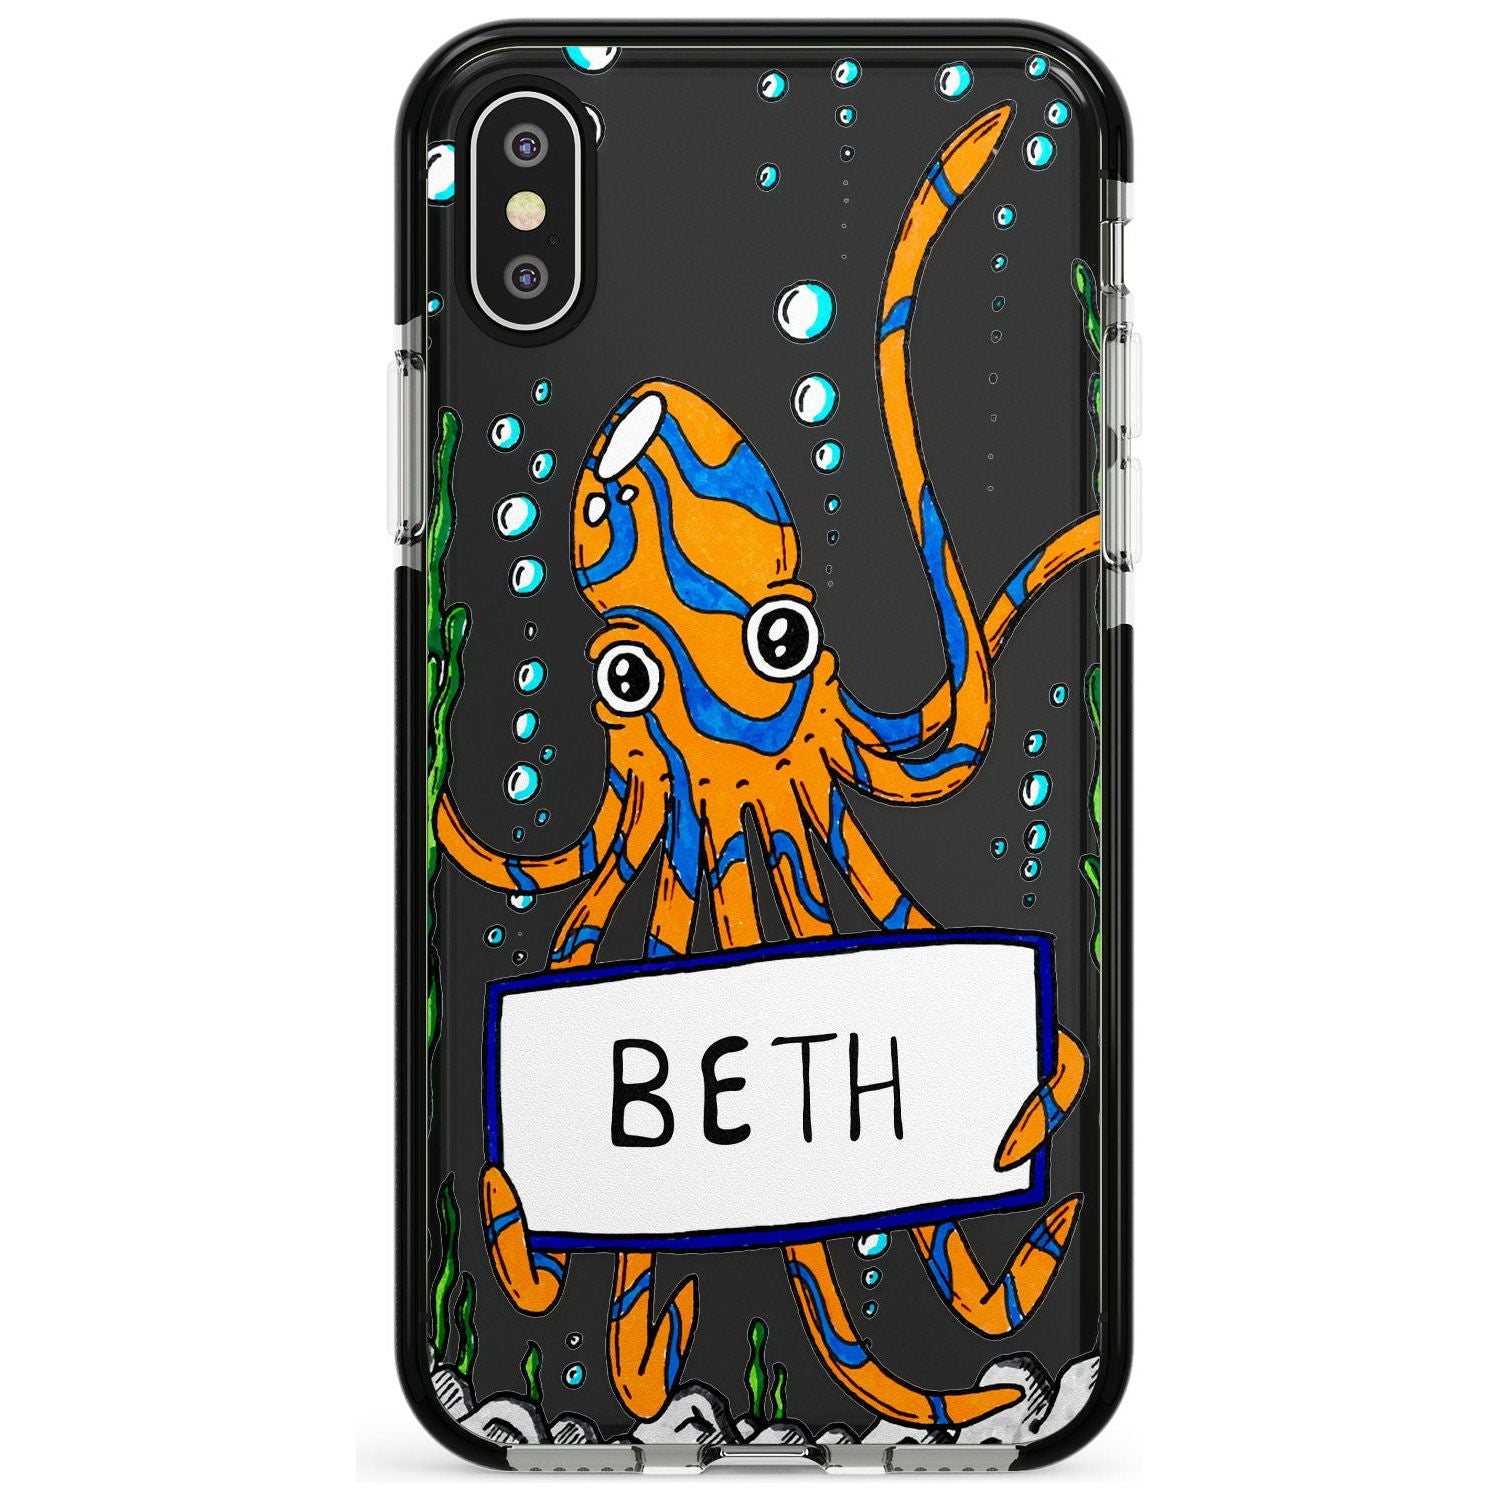 Personalised Custom Octo Black Impact Phone Case for iPhone X XS Max XR